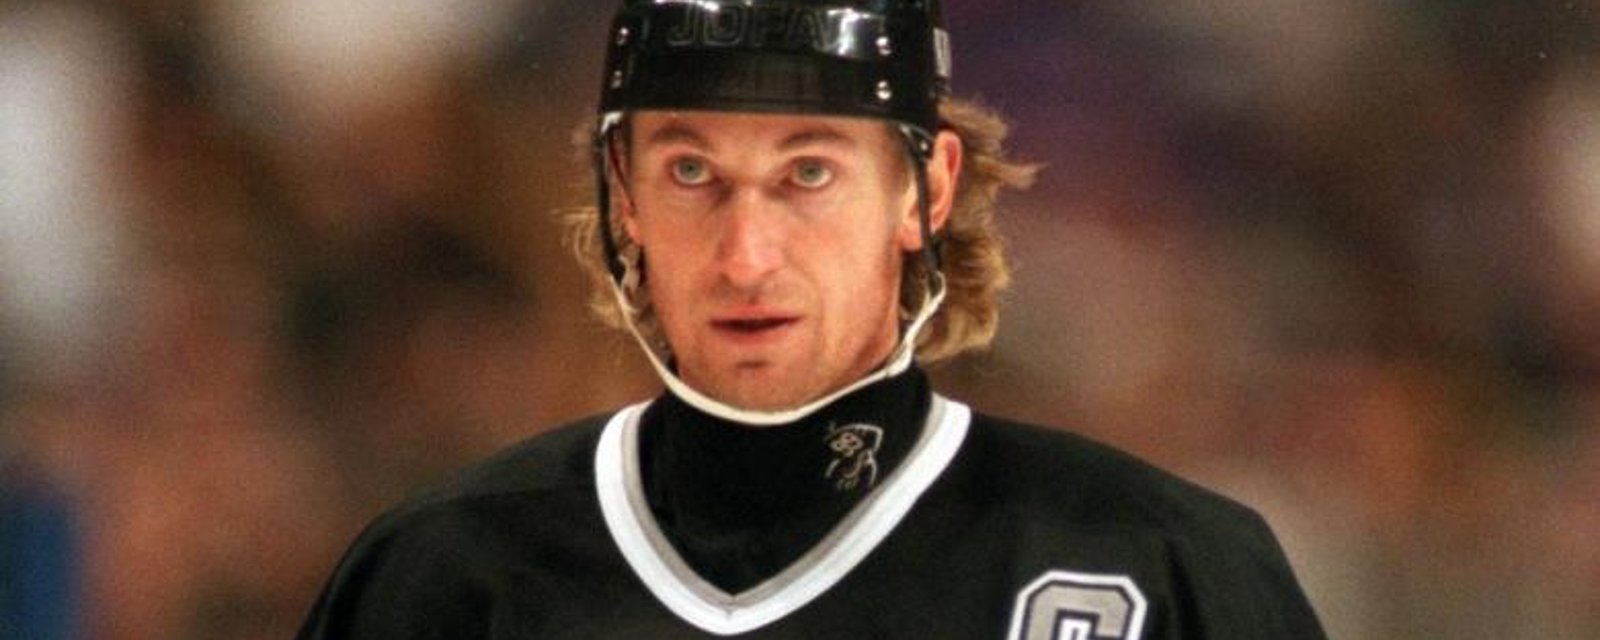 Gretzky reacts to the passing of a man he says was “everything.”